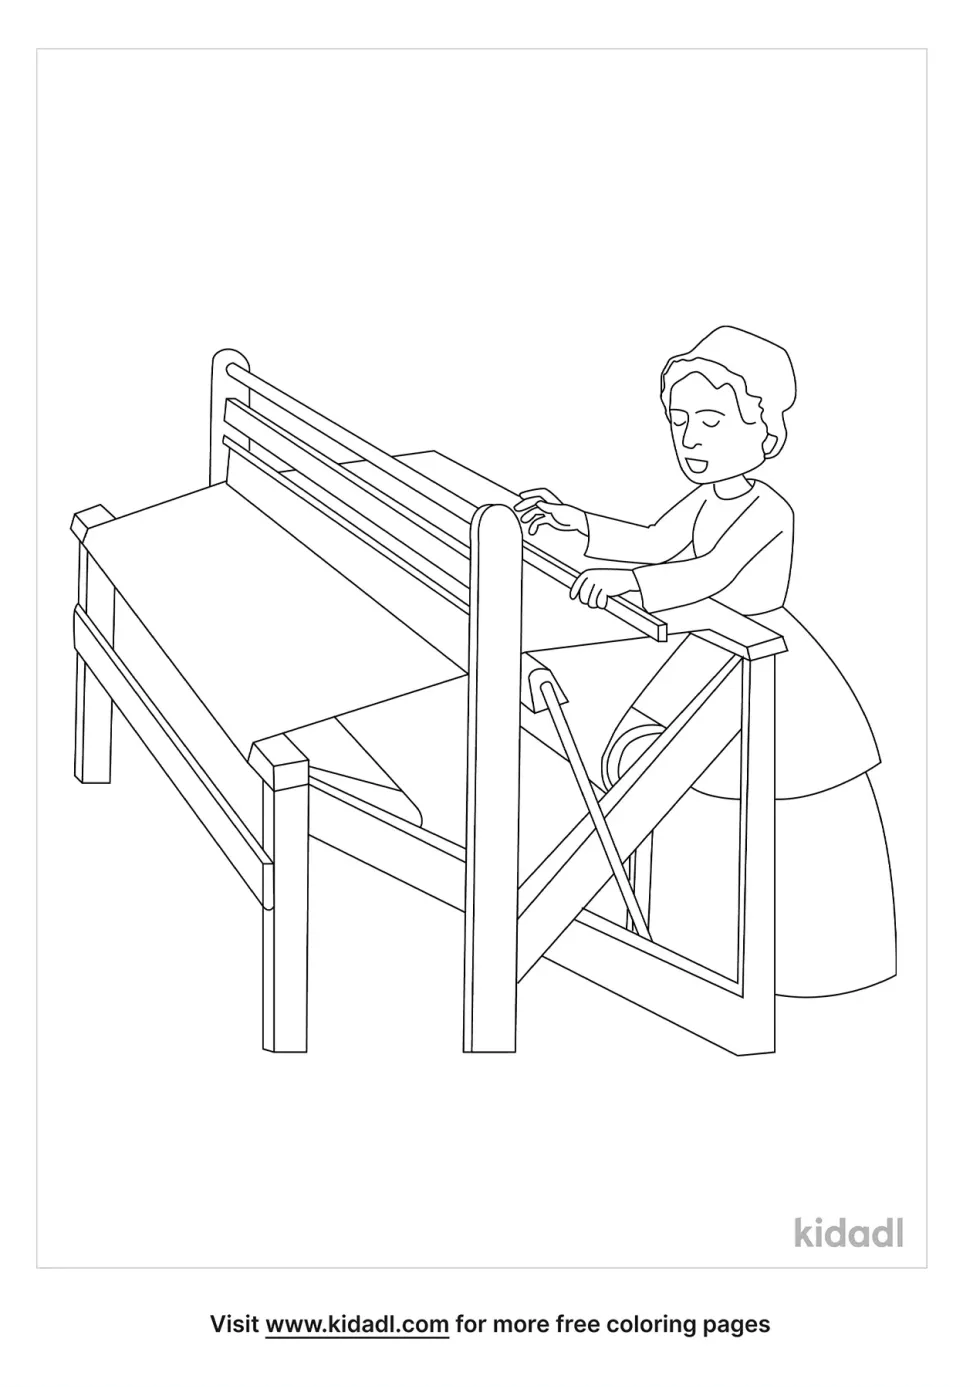 Colonial Women Weaving Coloring Page